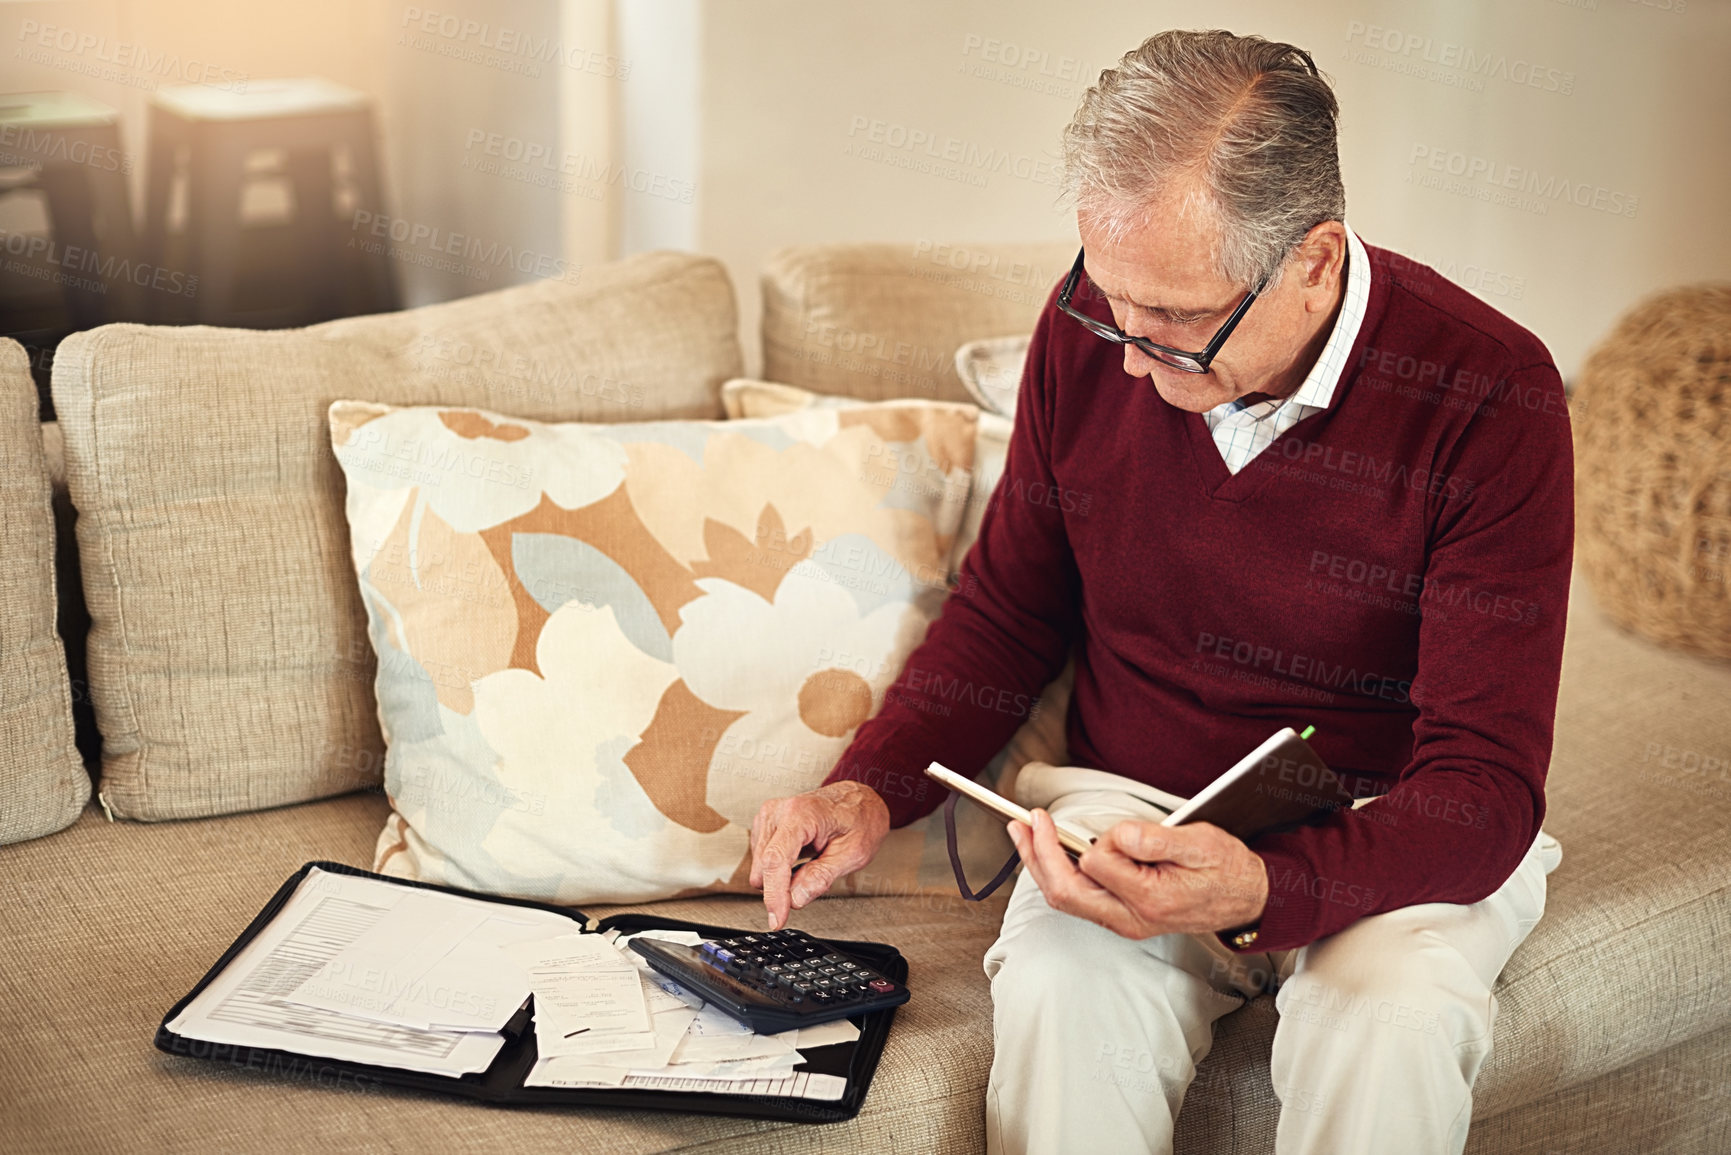 Buy stock photo Shot of a senior man working out a budget while sitting on the living room sofa